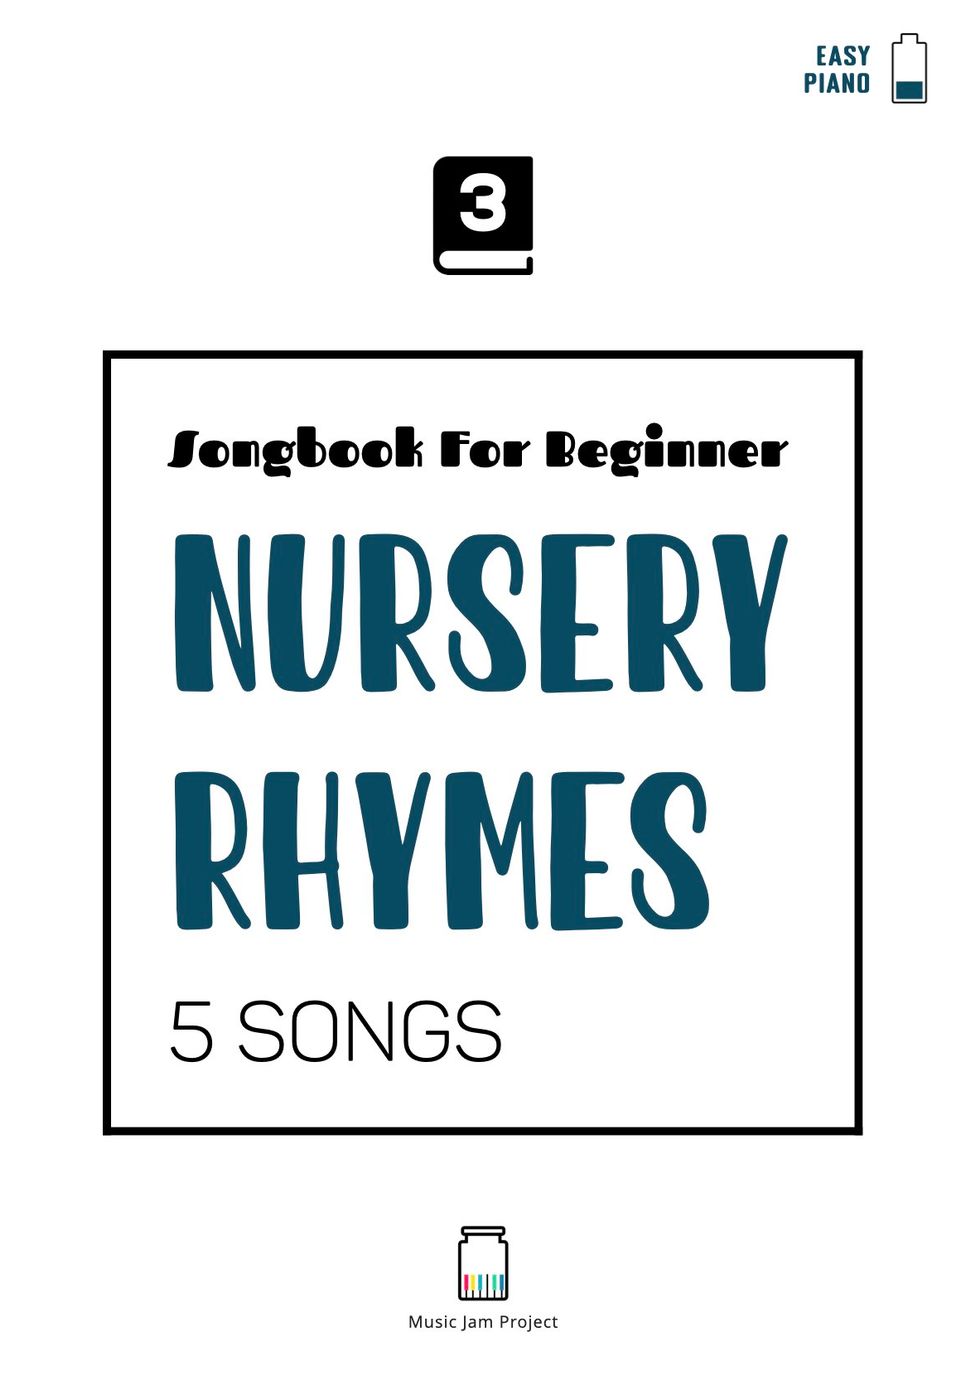 Nursery Rhymes For Beginner - Book 3 by Benny Chaw